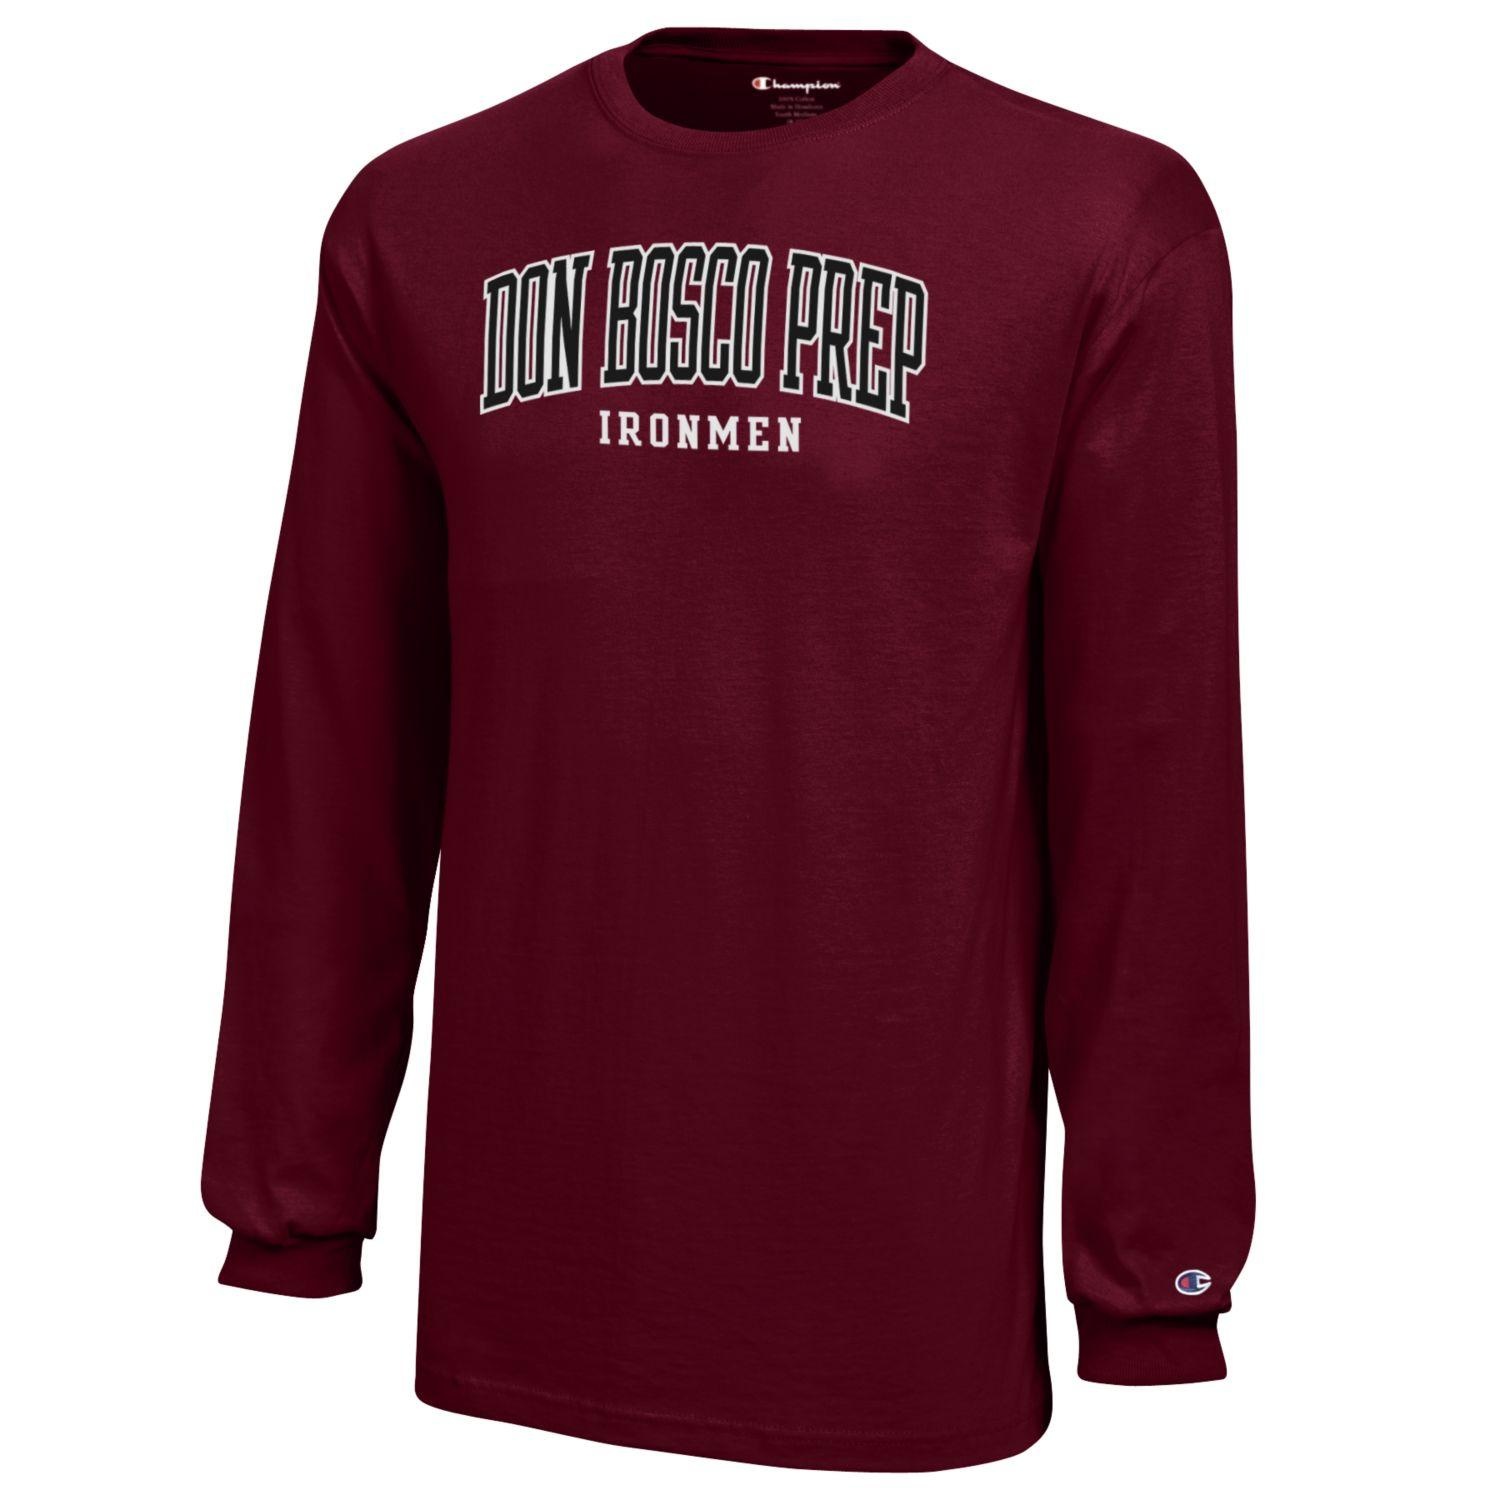 New Youth Champion LS T Shirt CT1751 - Don Bosco Prep Campus Store